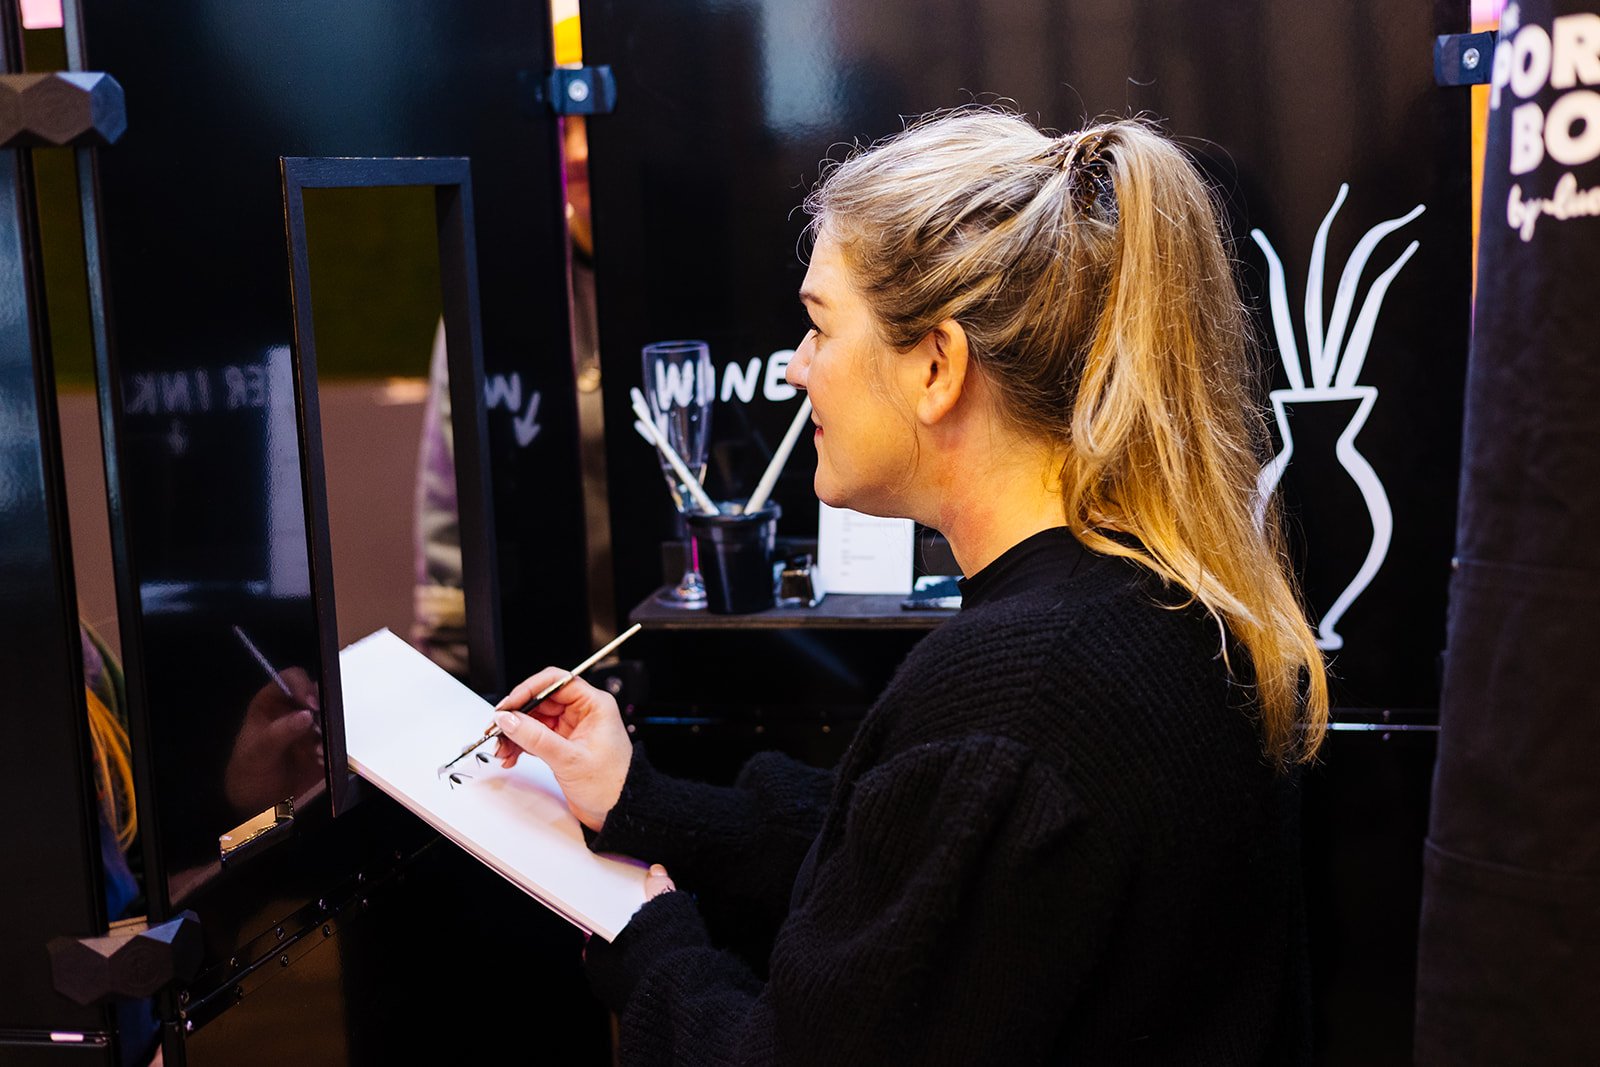  A woman with a long blonde ponytail is drawing someone’s portrait at a wedding fair. 